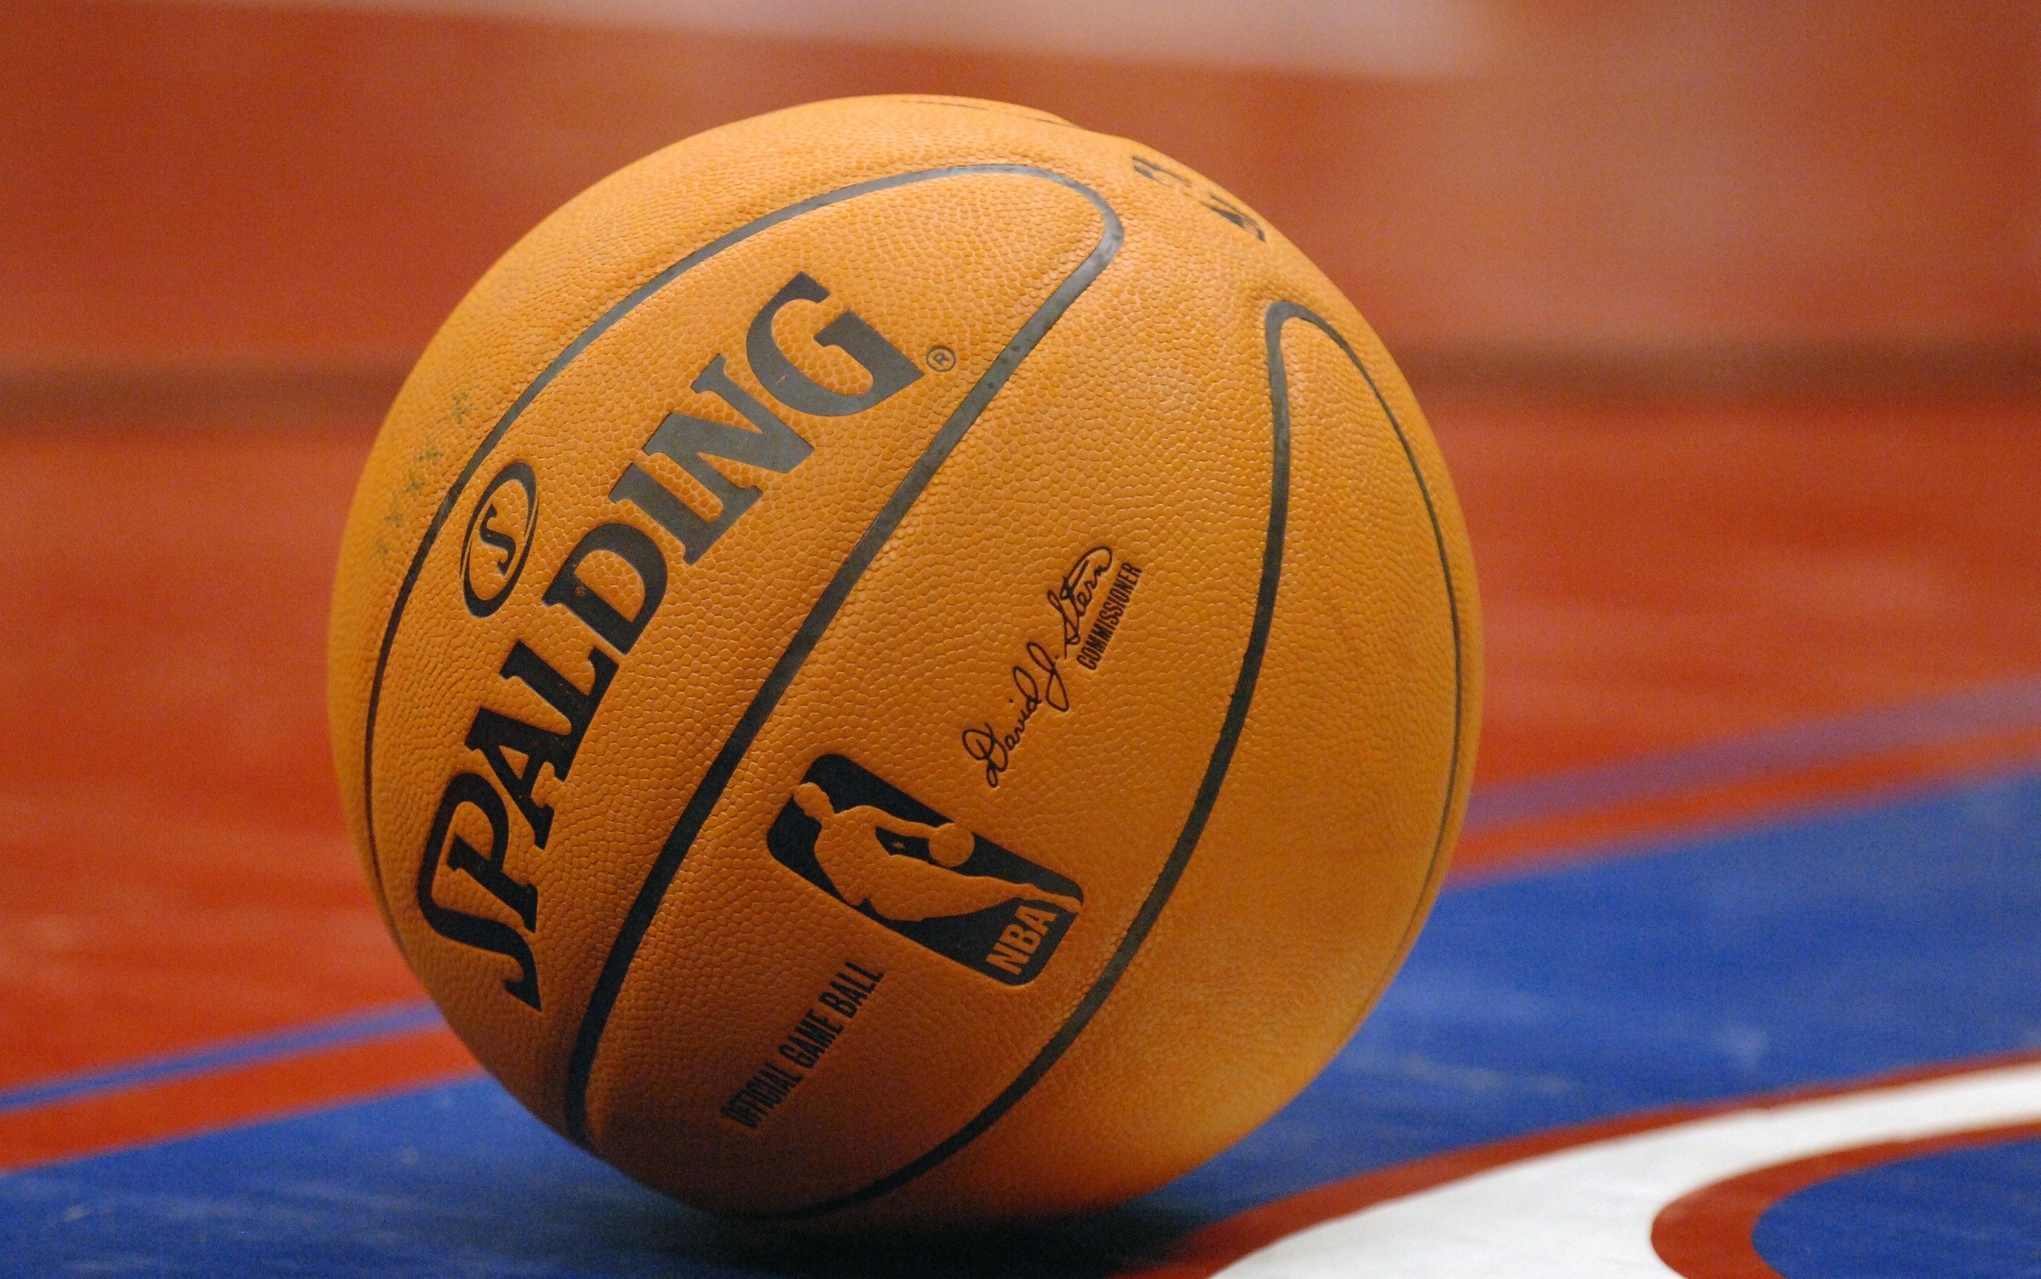 The NBA Ball That Everyone Hated: Throwback Thursday